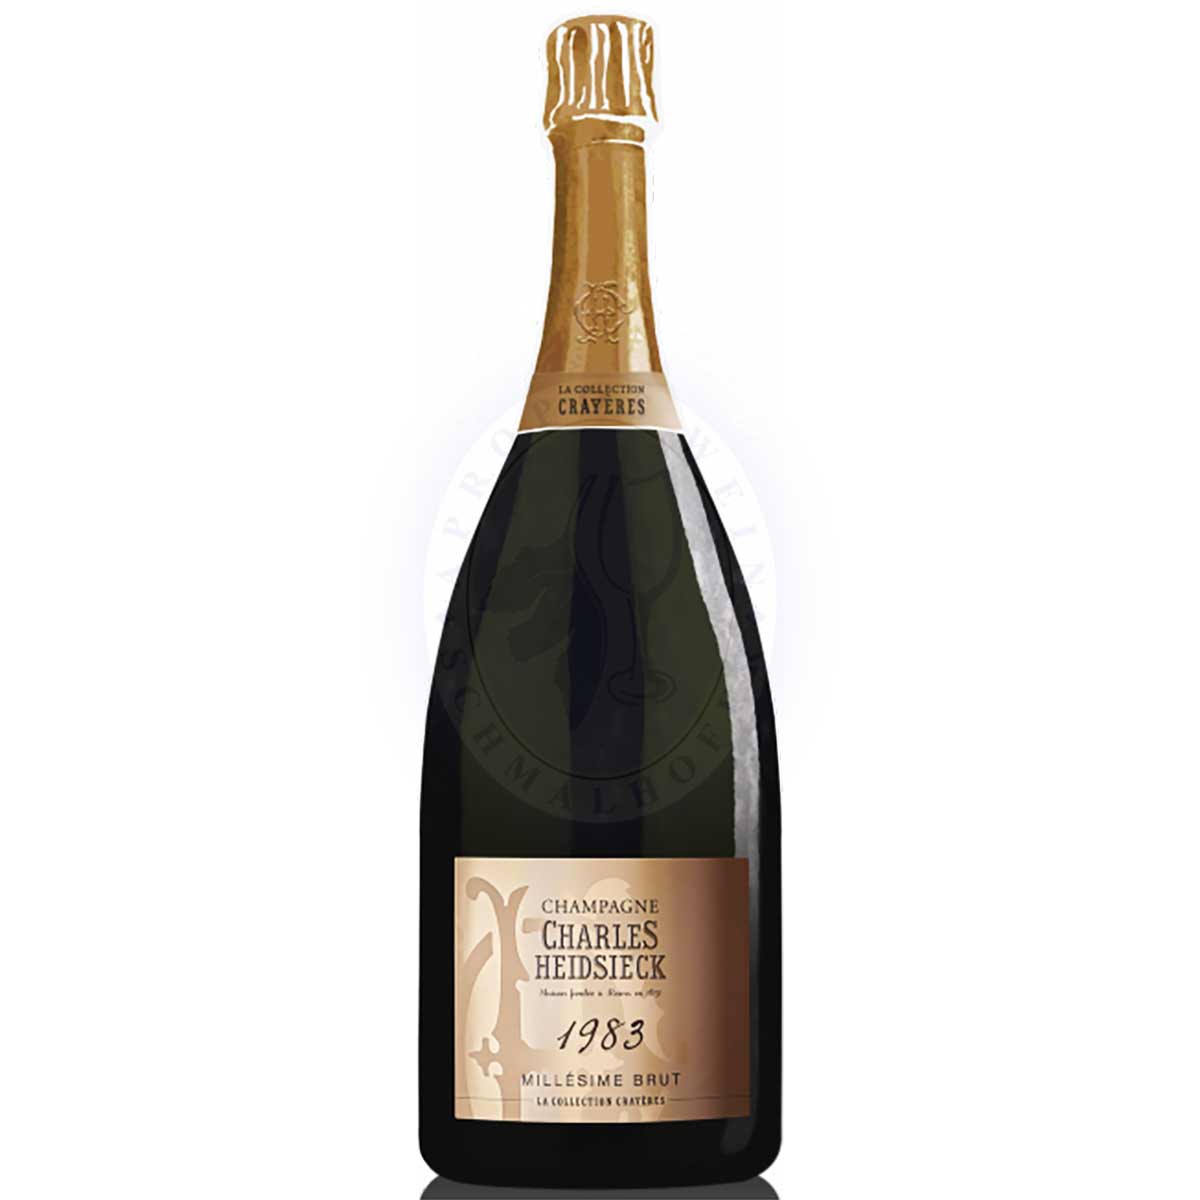 Collection Crayeres Charlie 1983 Charles Heidsieck